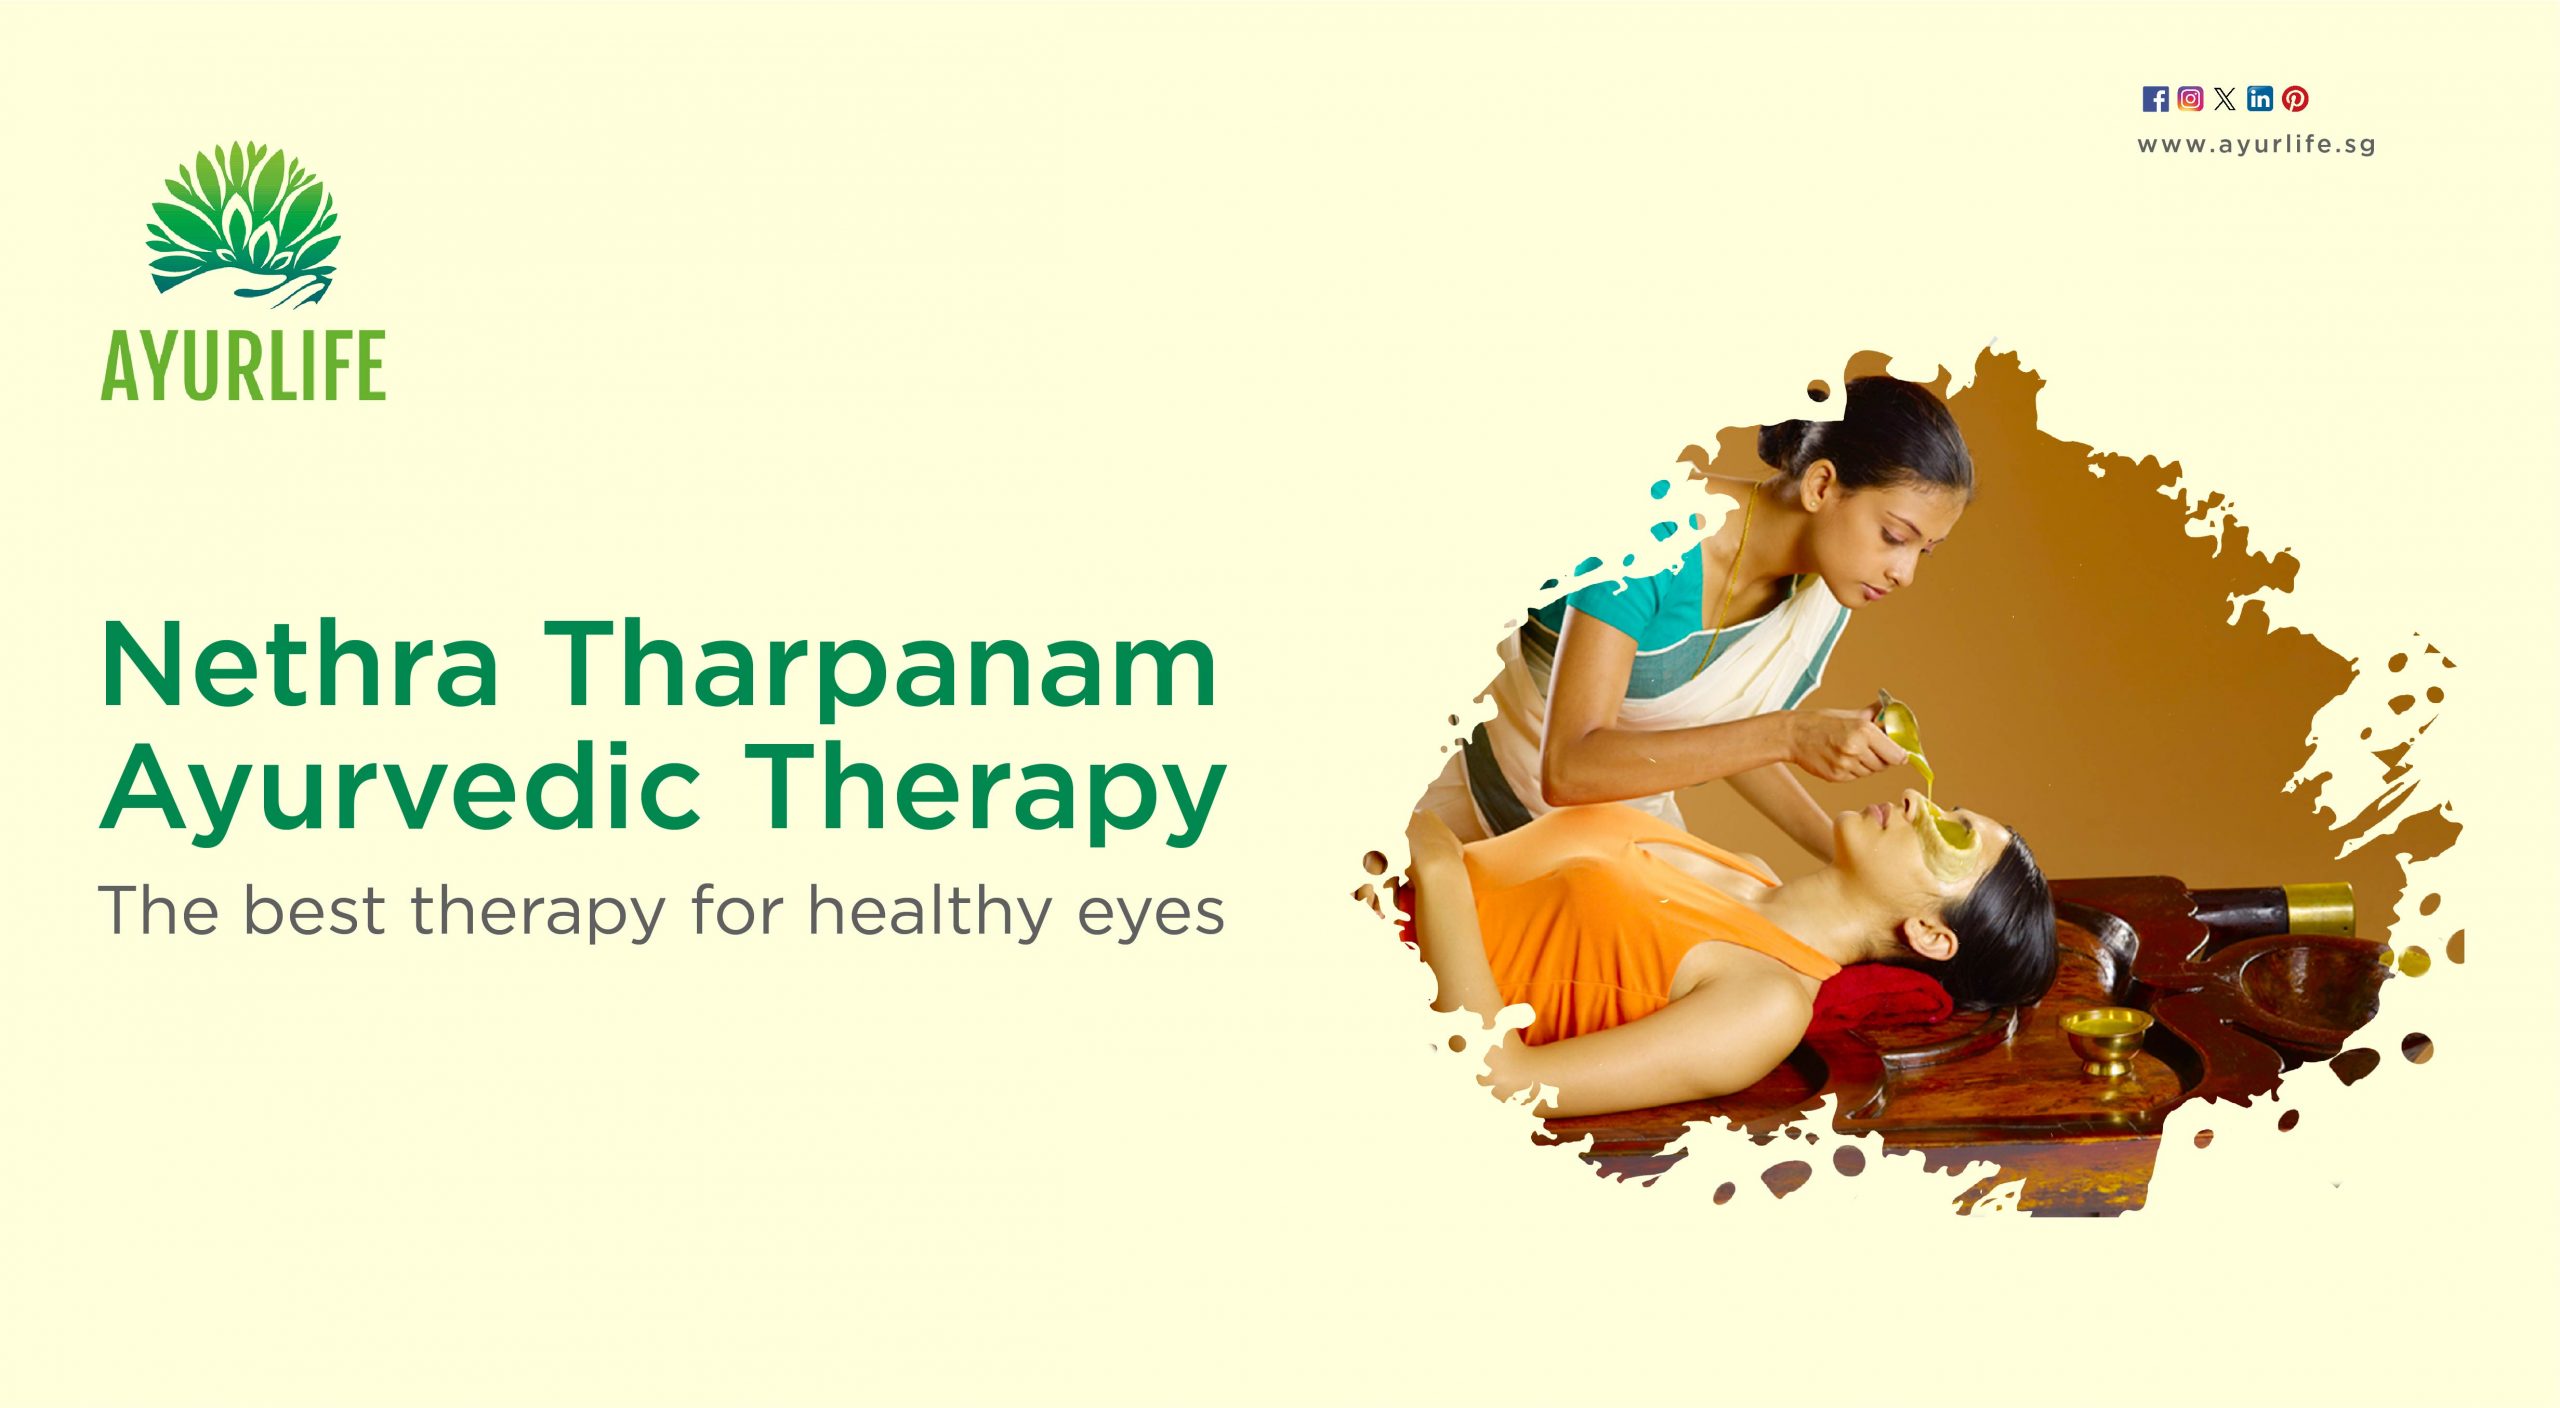 You are currently viewing Nethra Tharpanam Ayurvedic Therapy: The best therapy for healthy eyes